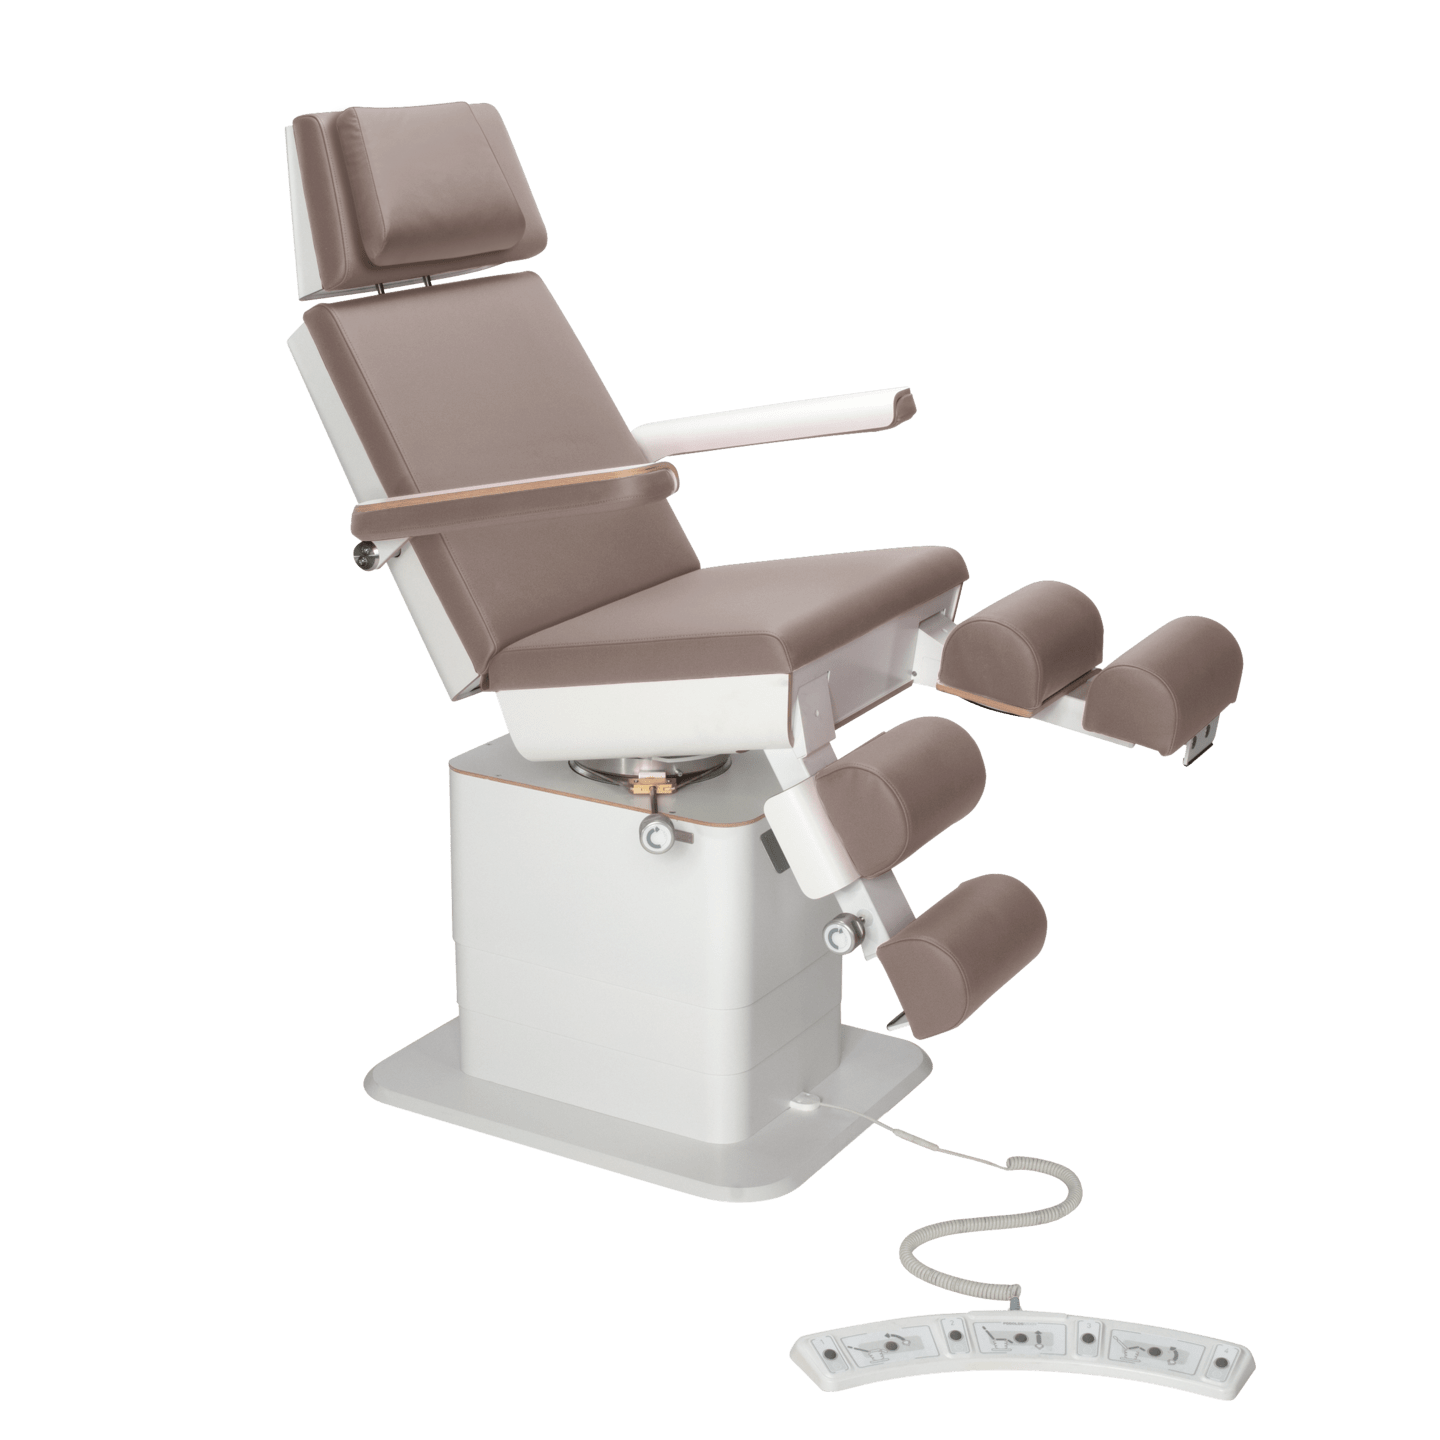 RUCK - MOON Podiatry Chair/Couch (with gas assisted leg sections) in nutmeg